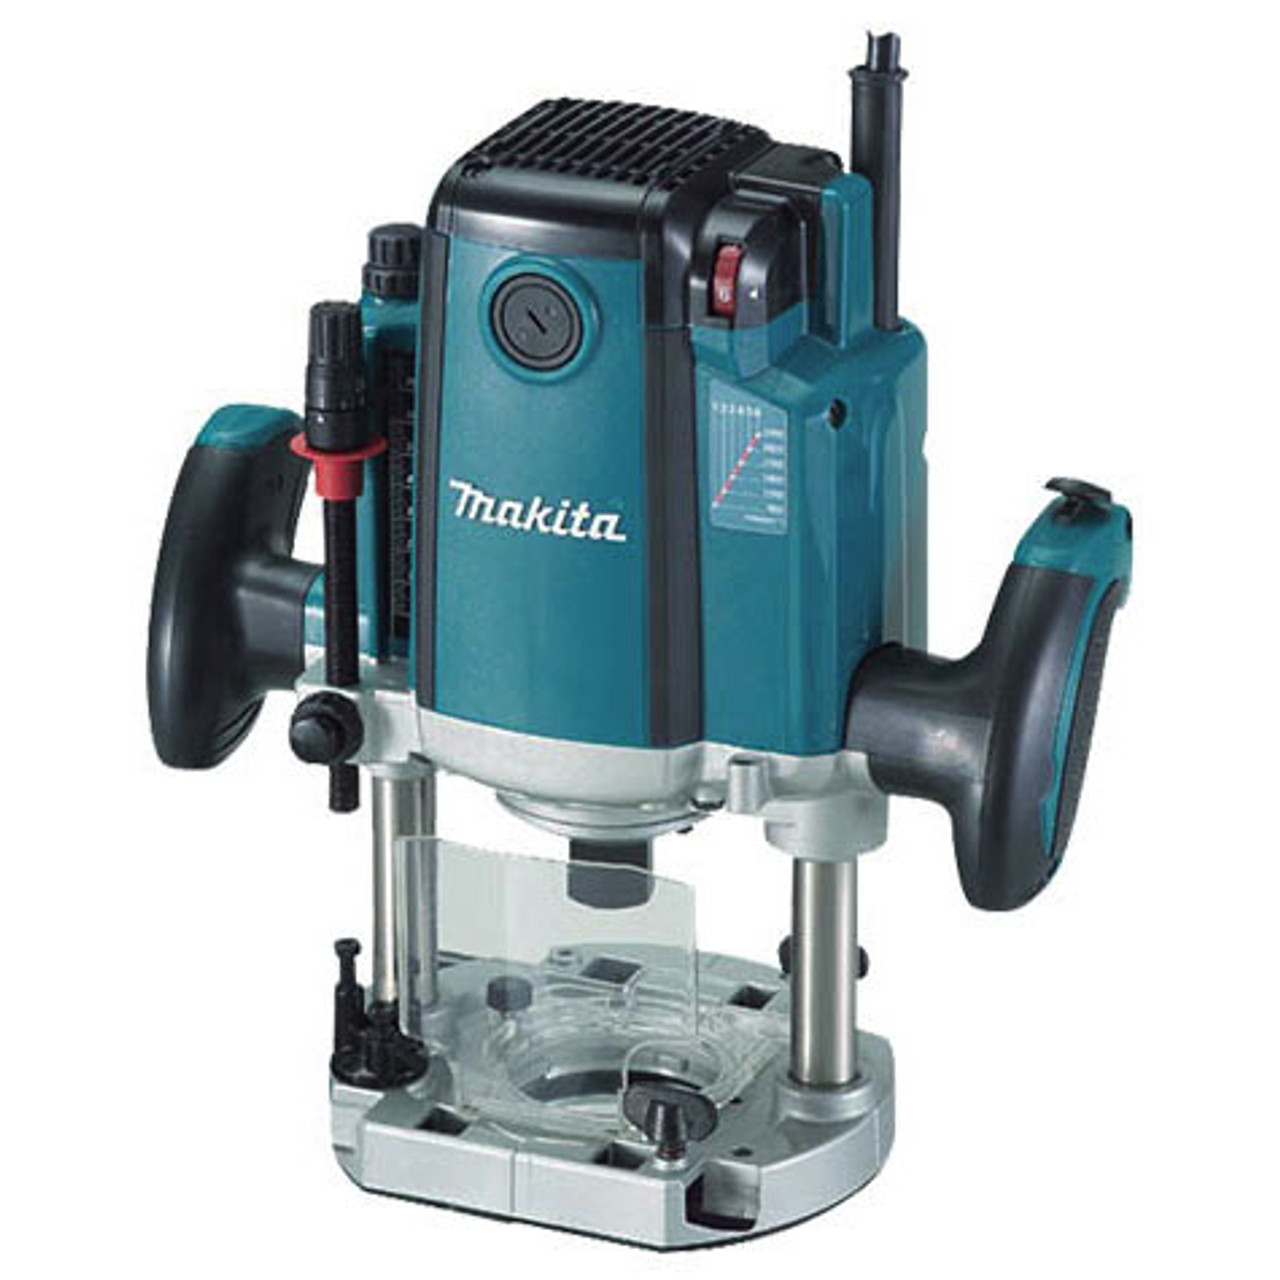 Makita Plunge Router 3-1/4 HP